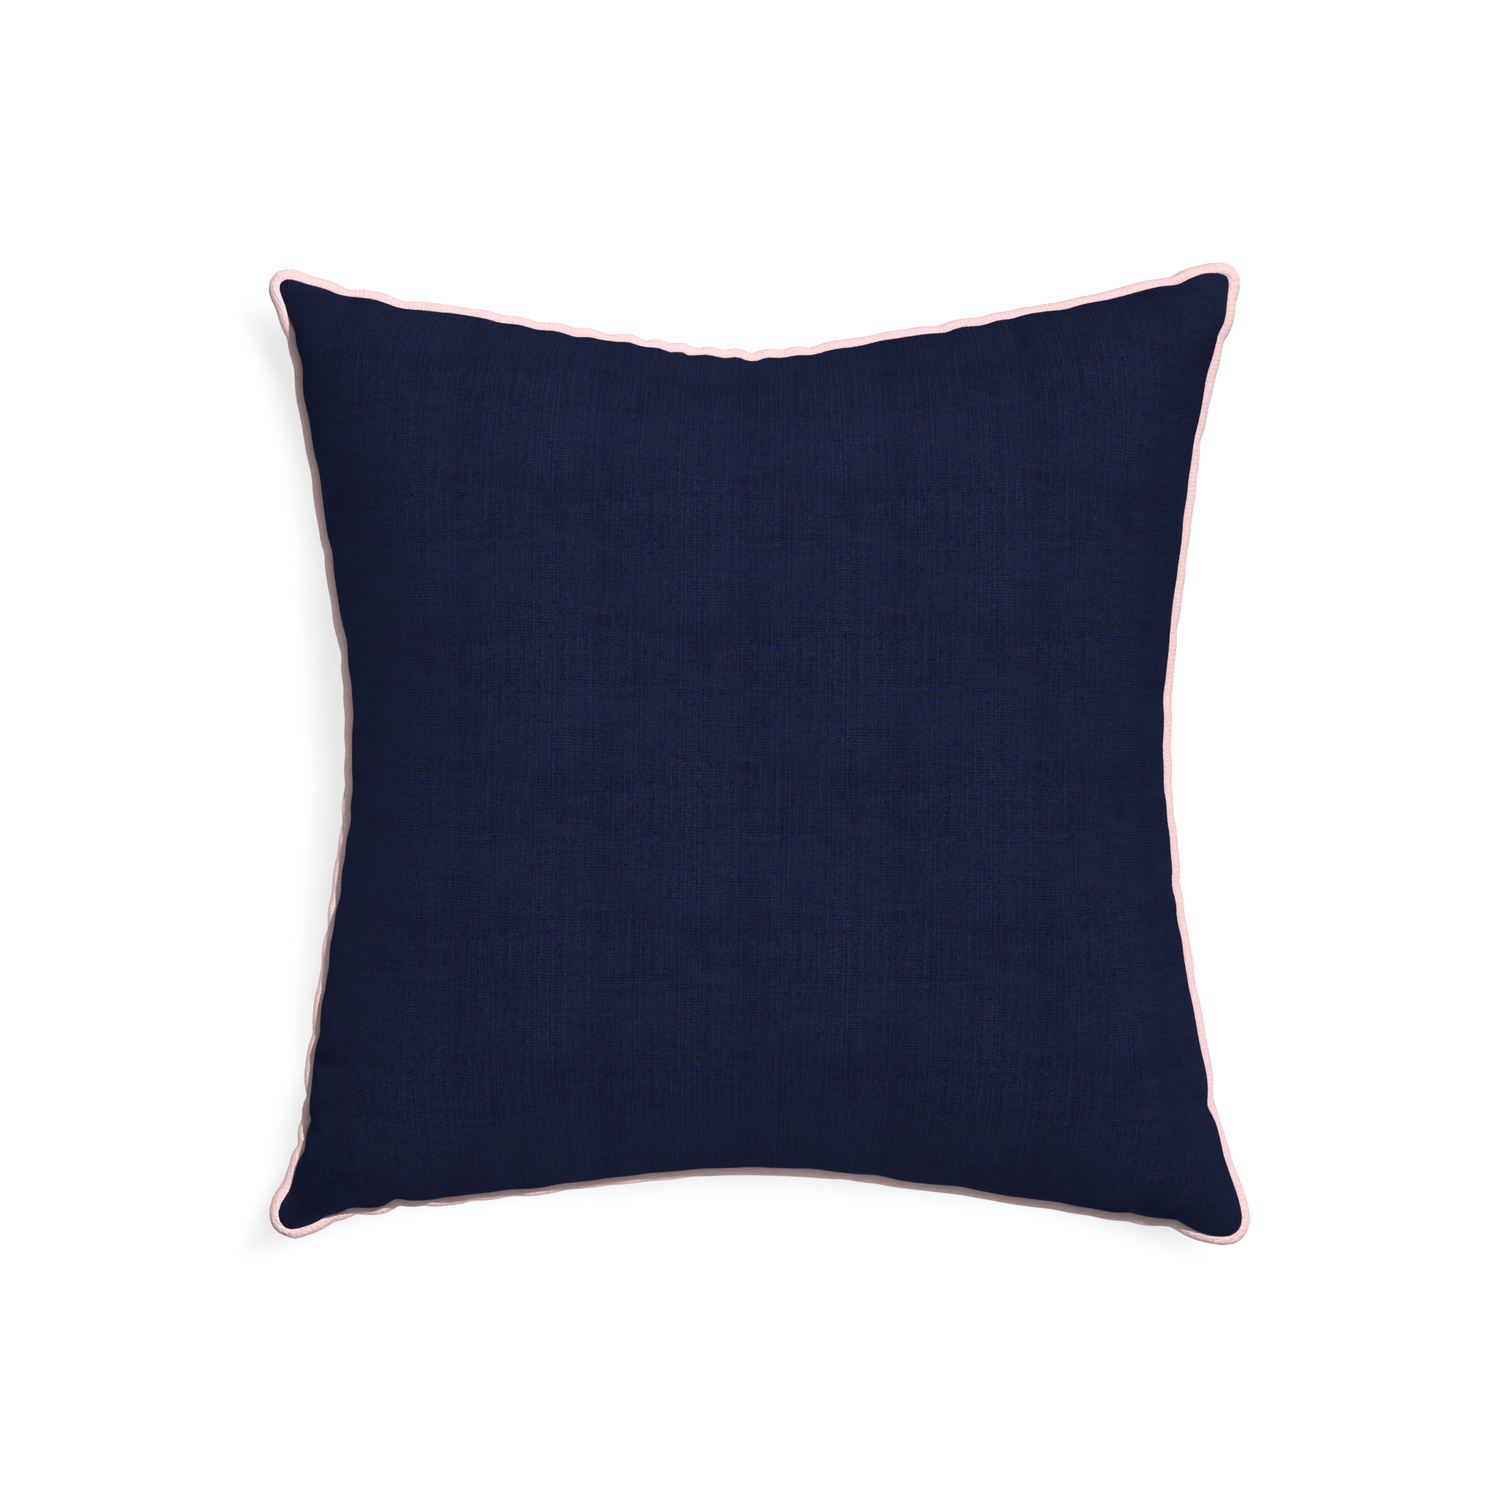 22-square midnight custom navy bluepillow with petal piping on white background